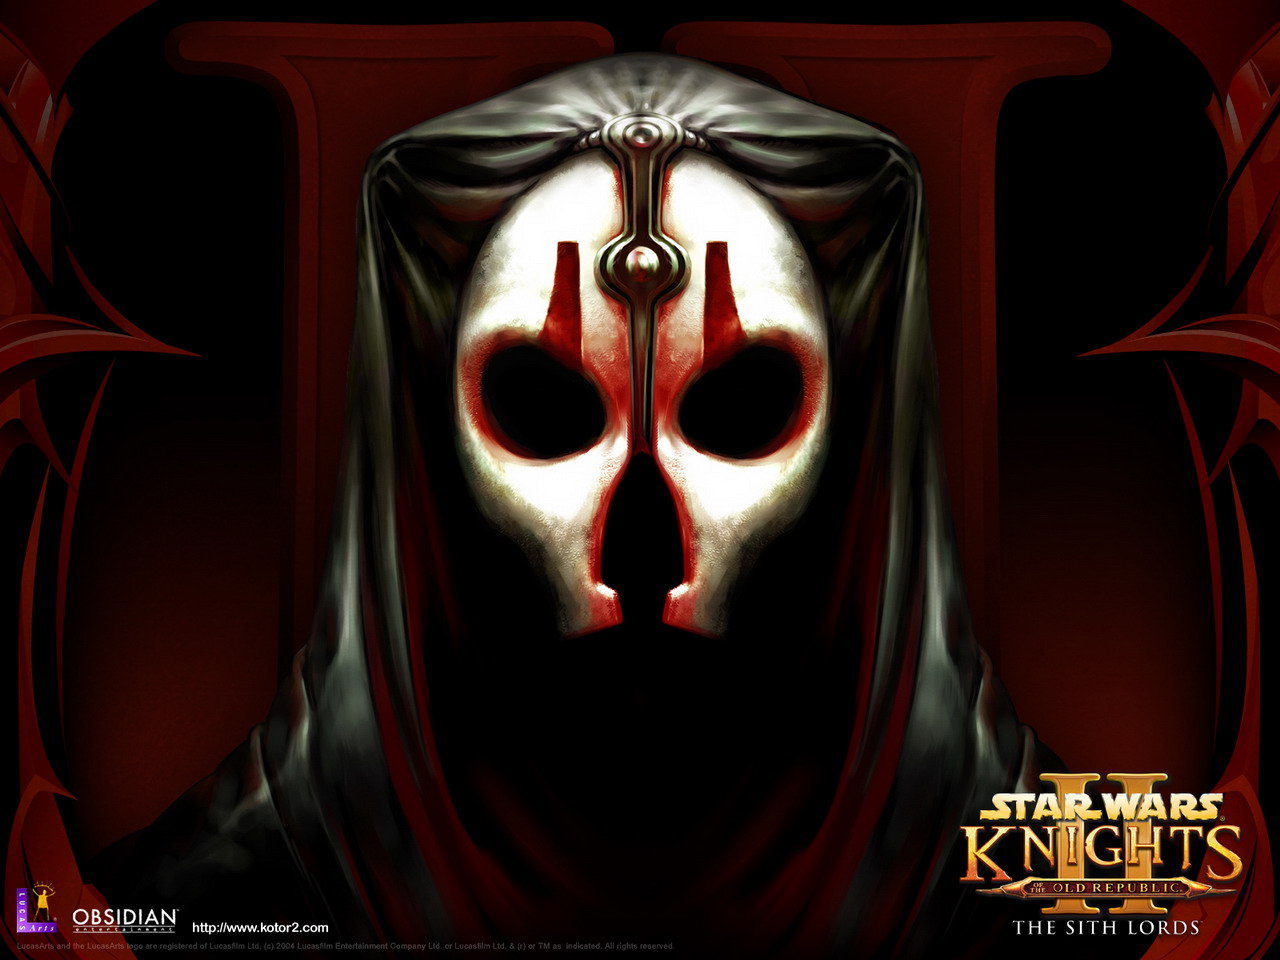 How To Get Star Wars Knights Of The Old Republic For Free Mac